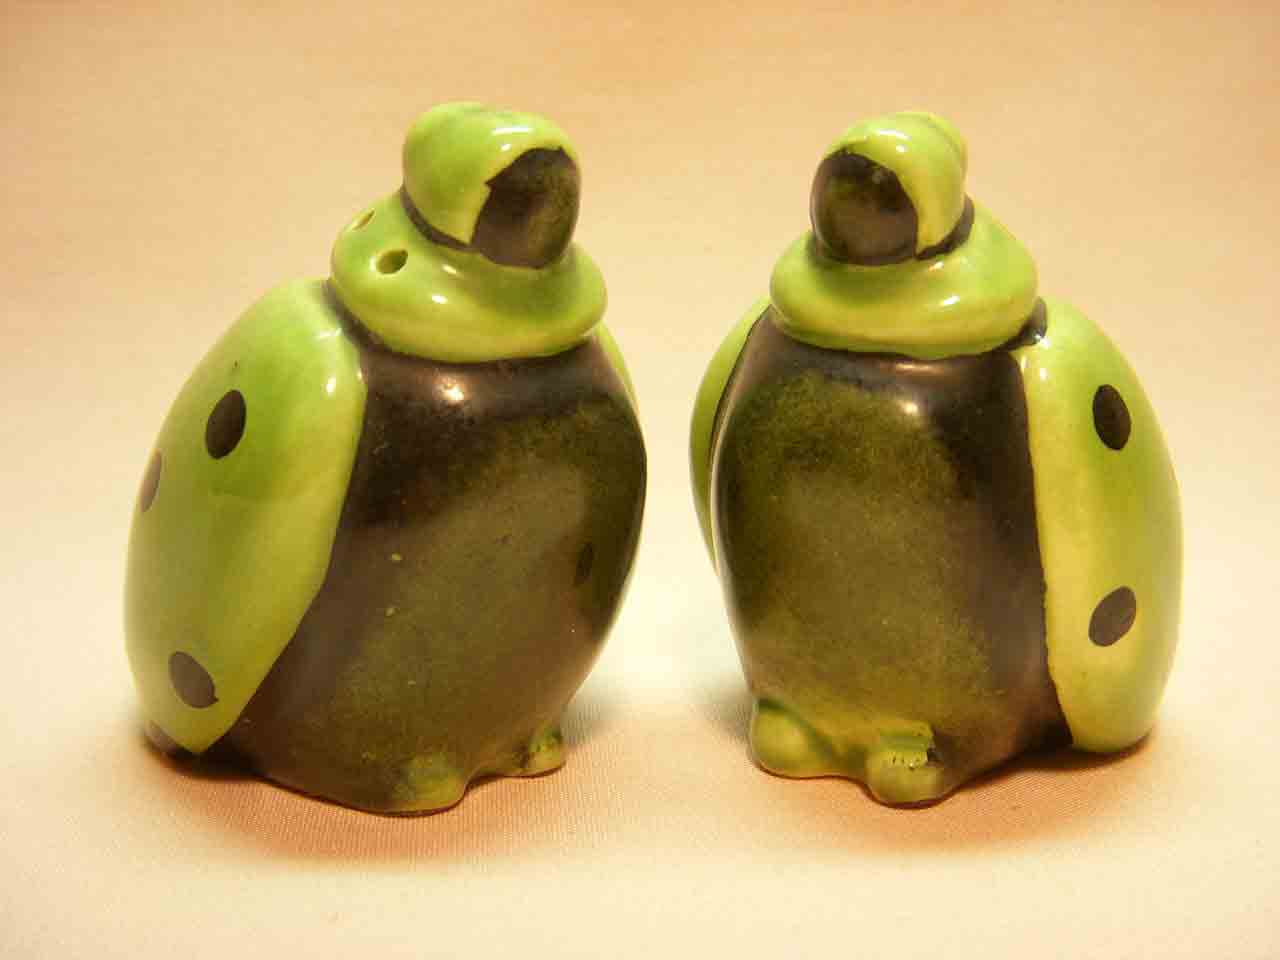 Vallona Starr lady bugs salt and pepper shakers